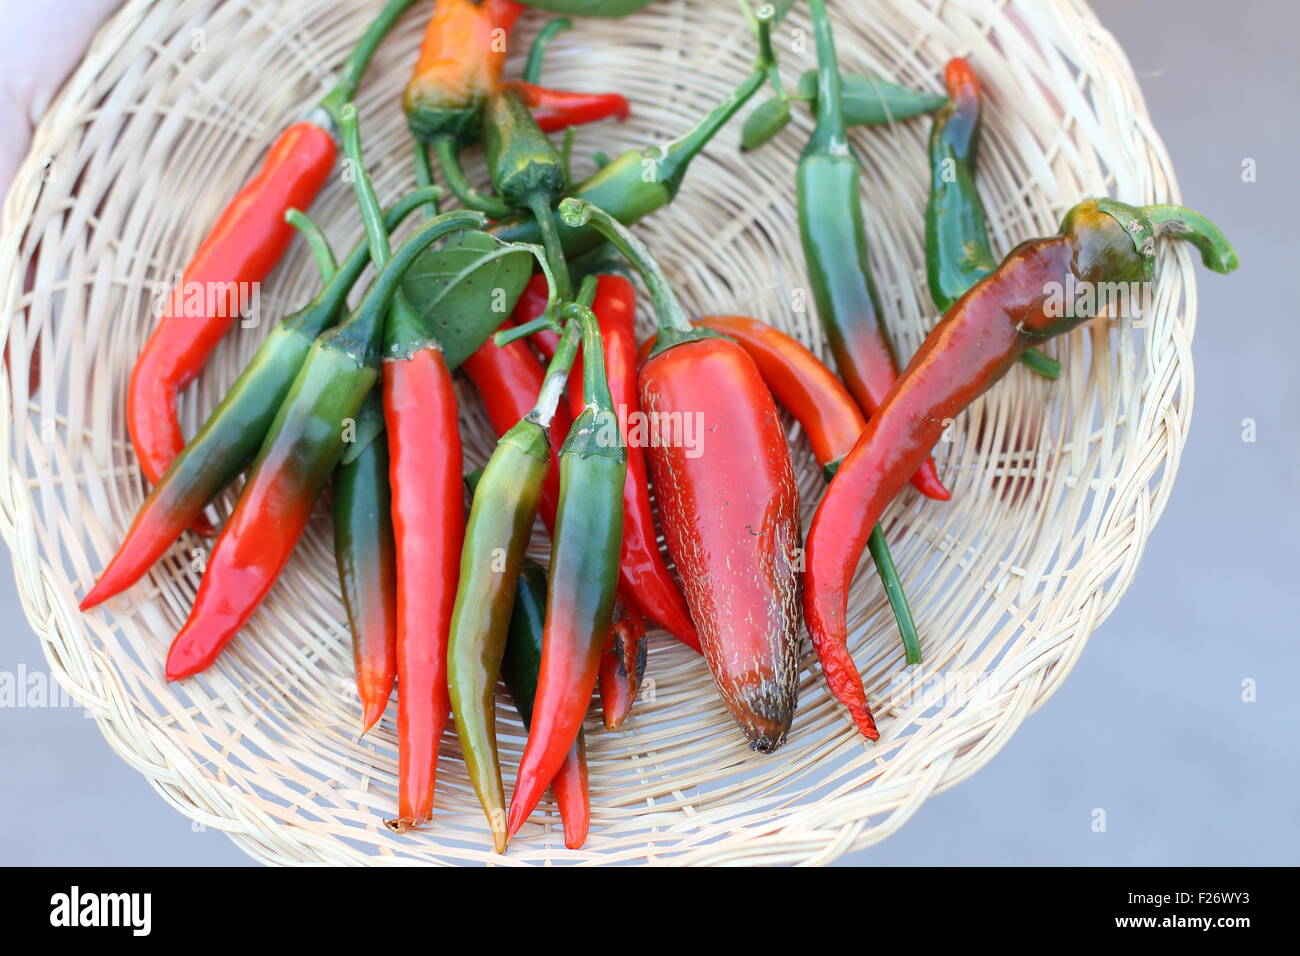 Home grown fresh long green and red chillies Stock Photo